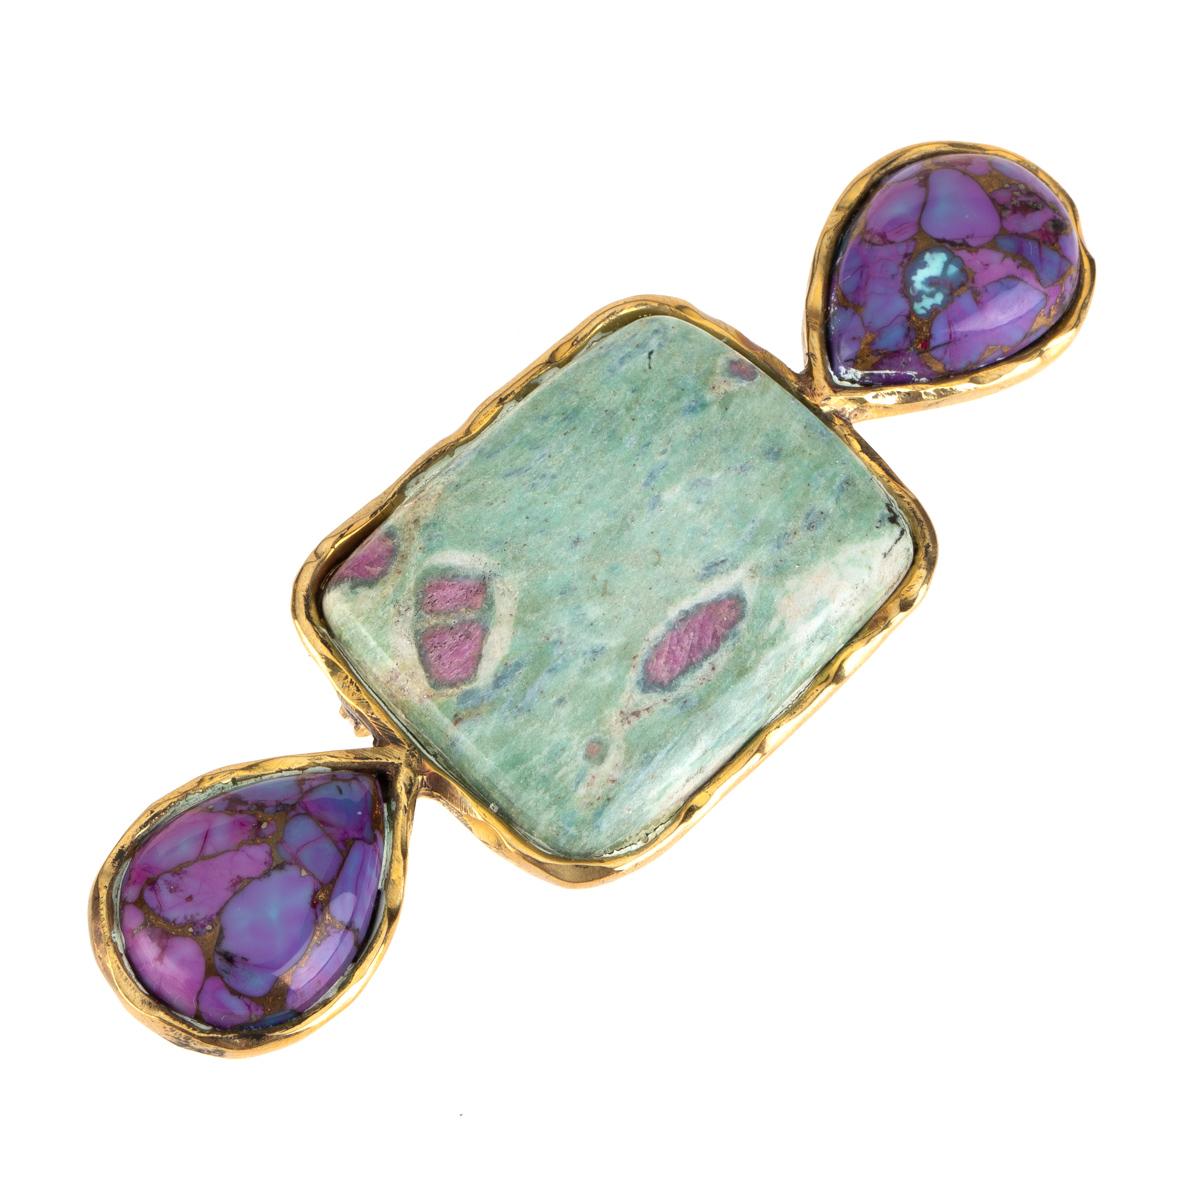 Turquoise in the rare violet color Amazonite Broches Linked in Bronze

All Giulia Colussi jewelry is new and has never been previously owned or worn. Each item will arrive at your door beautifully gift wrapped in our boxes, put inside an elegant